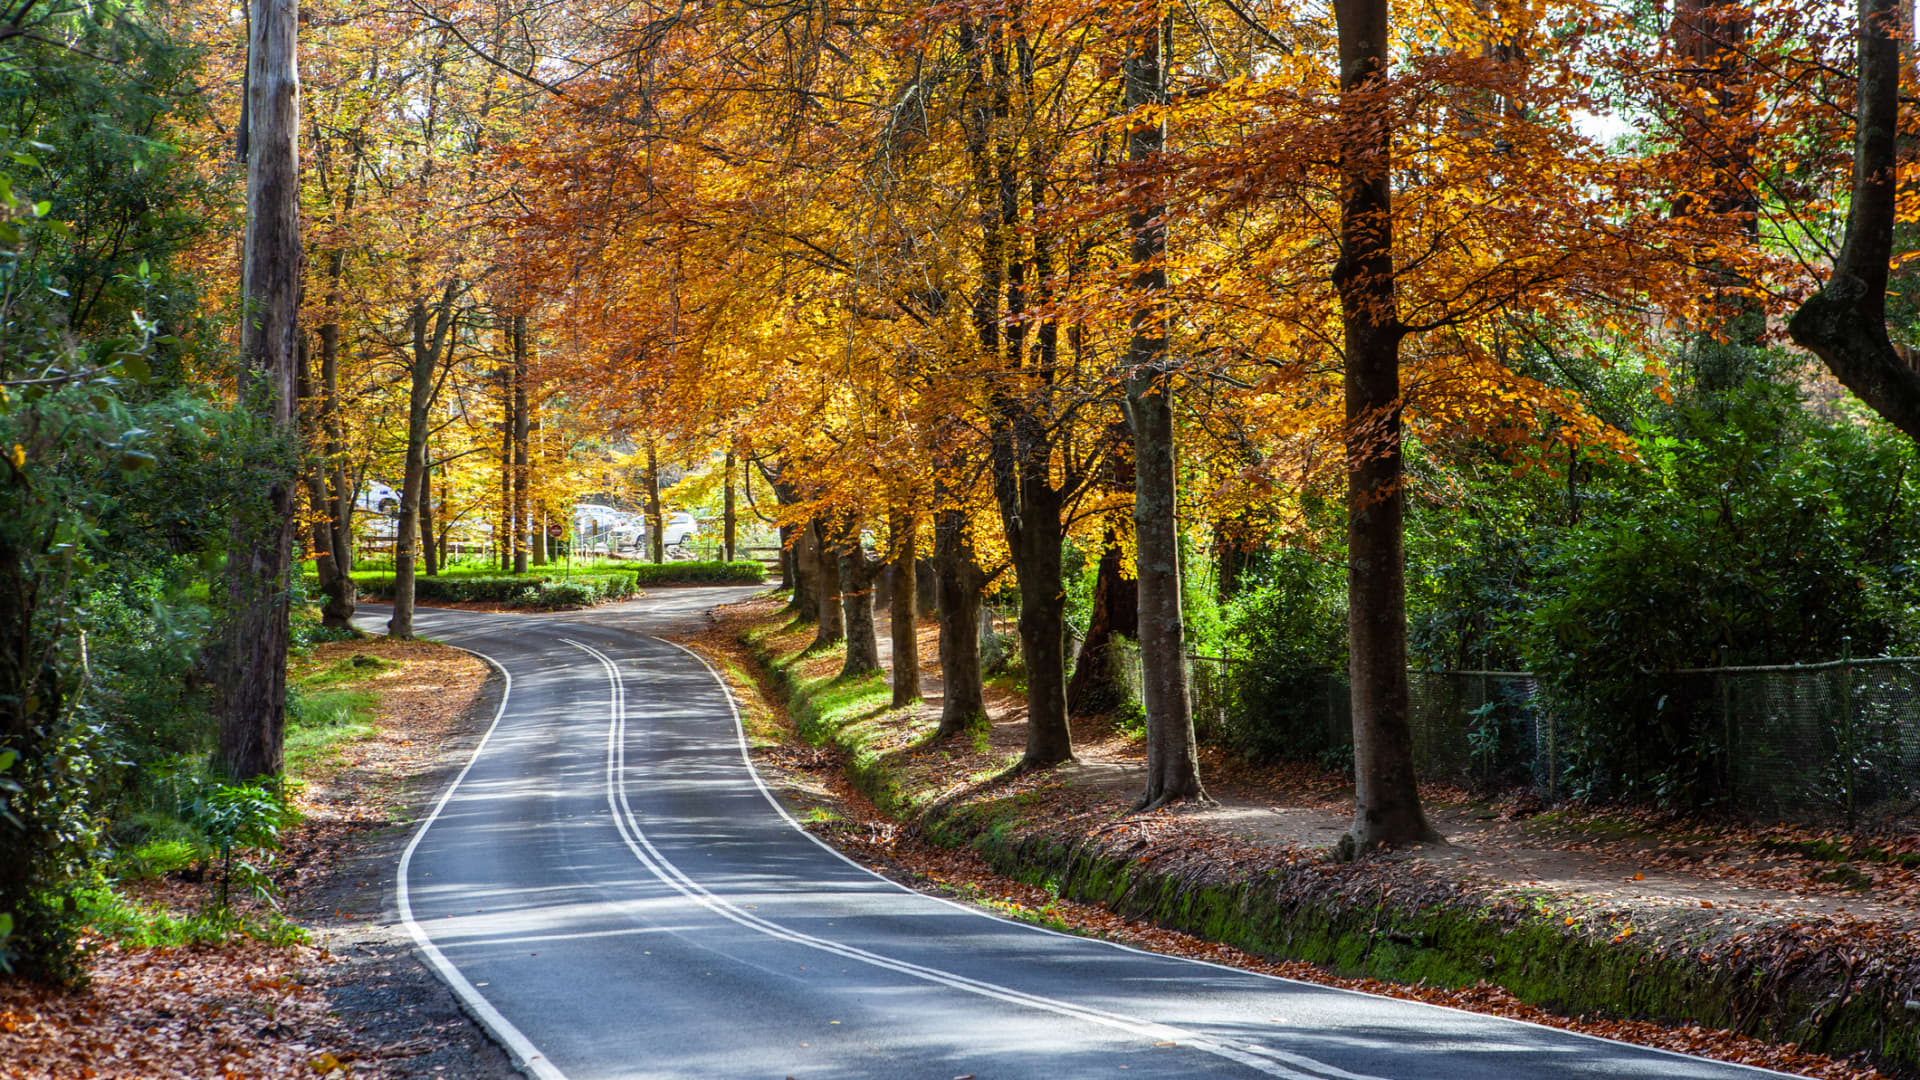 During the fall, visitors in the Dandenong Ranges can enjoy apple-picking and viewing the vibrant maple tree leaves.